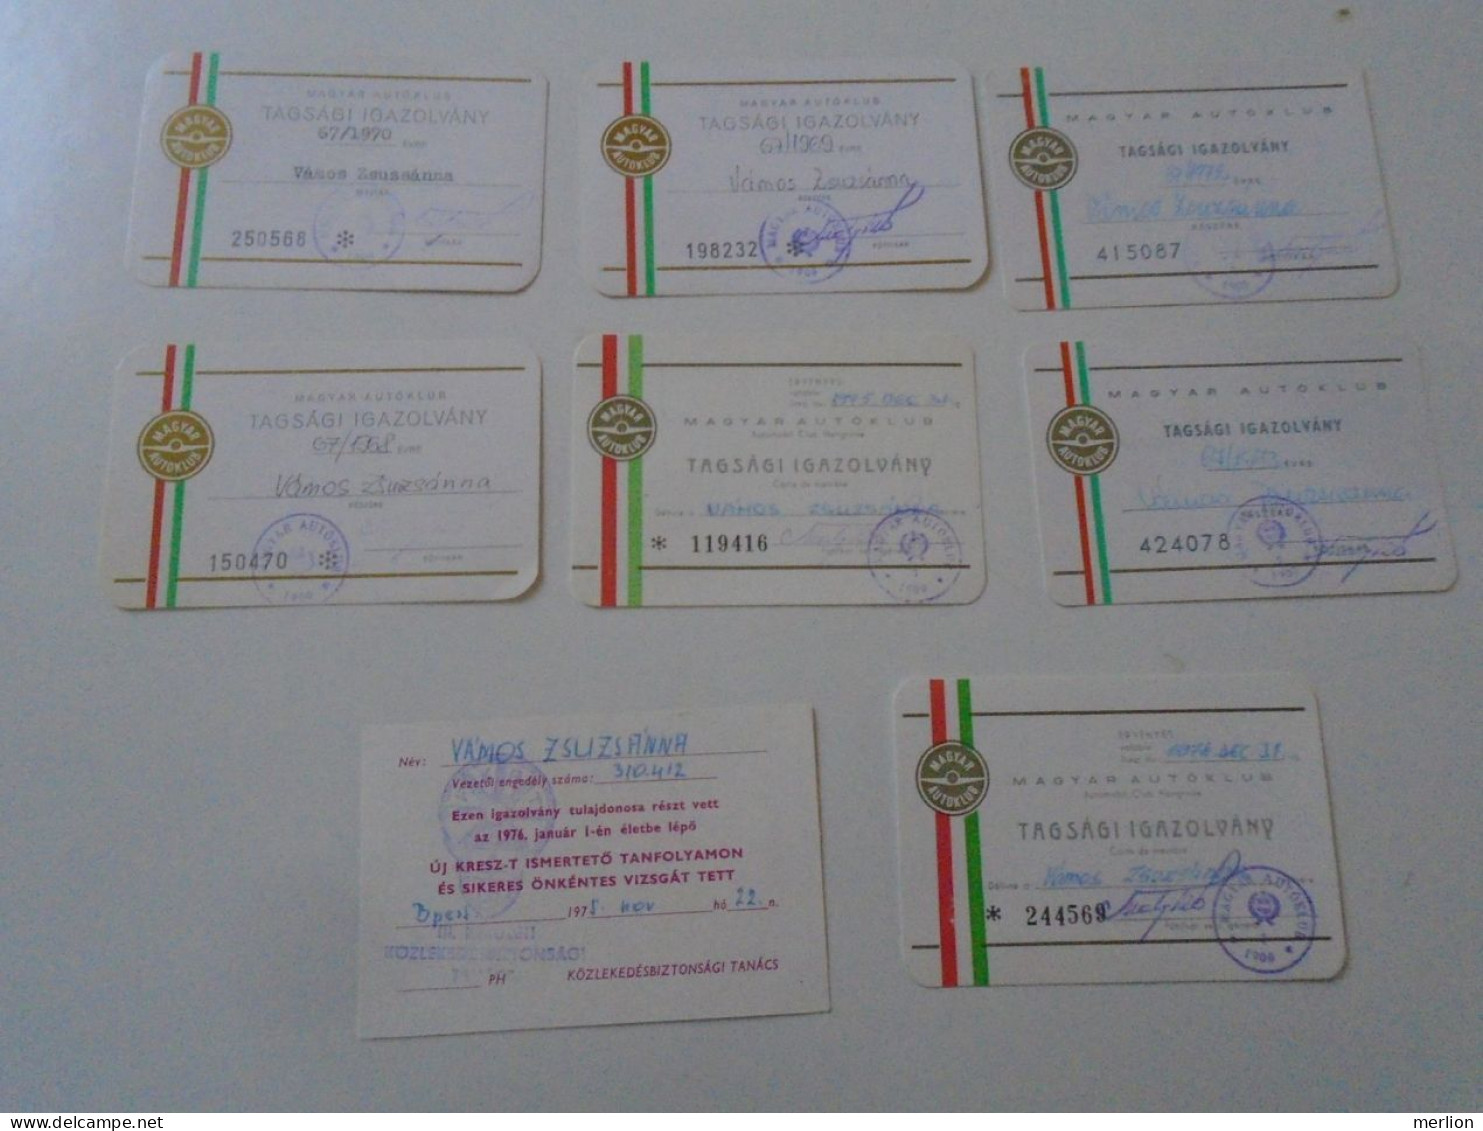 D203063   Lot Of 9 Membership Cards  Hungary  Magyar Autóklub -Hungarian Automobile Club -some With Stamps 1968-75 - Mitgliedskarten